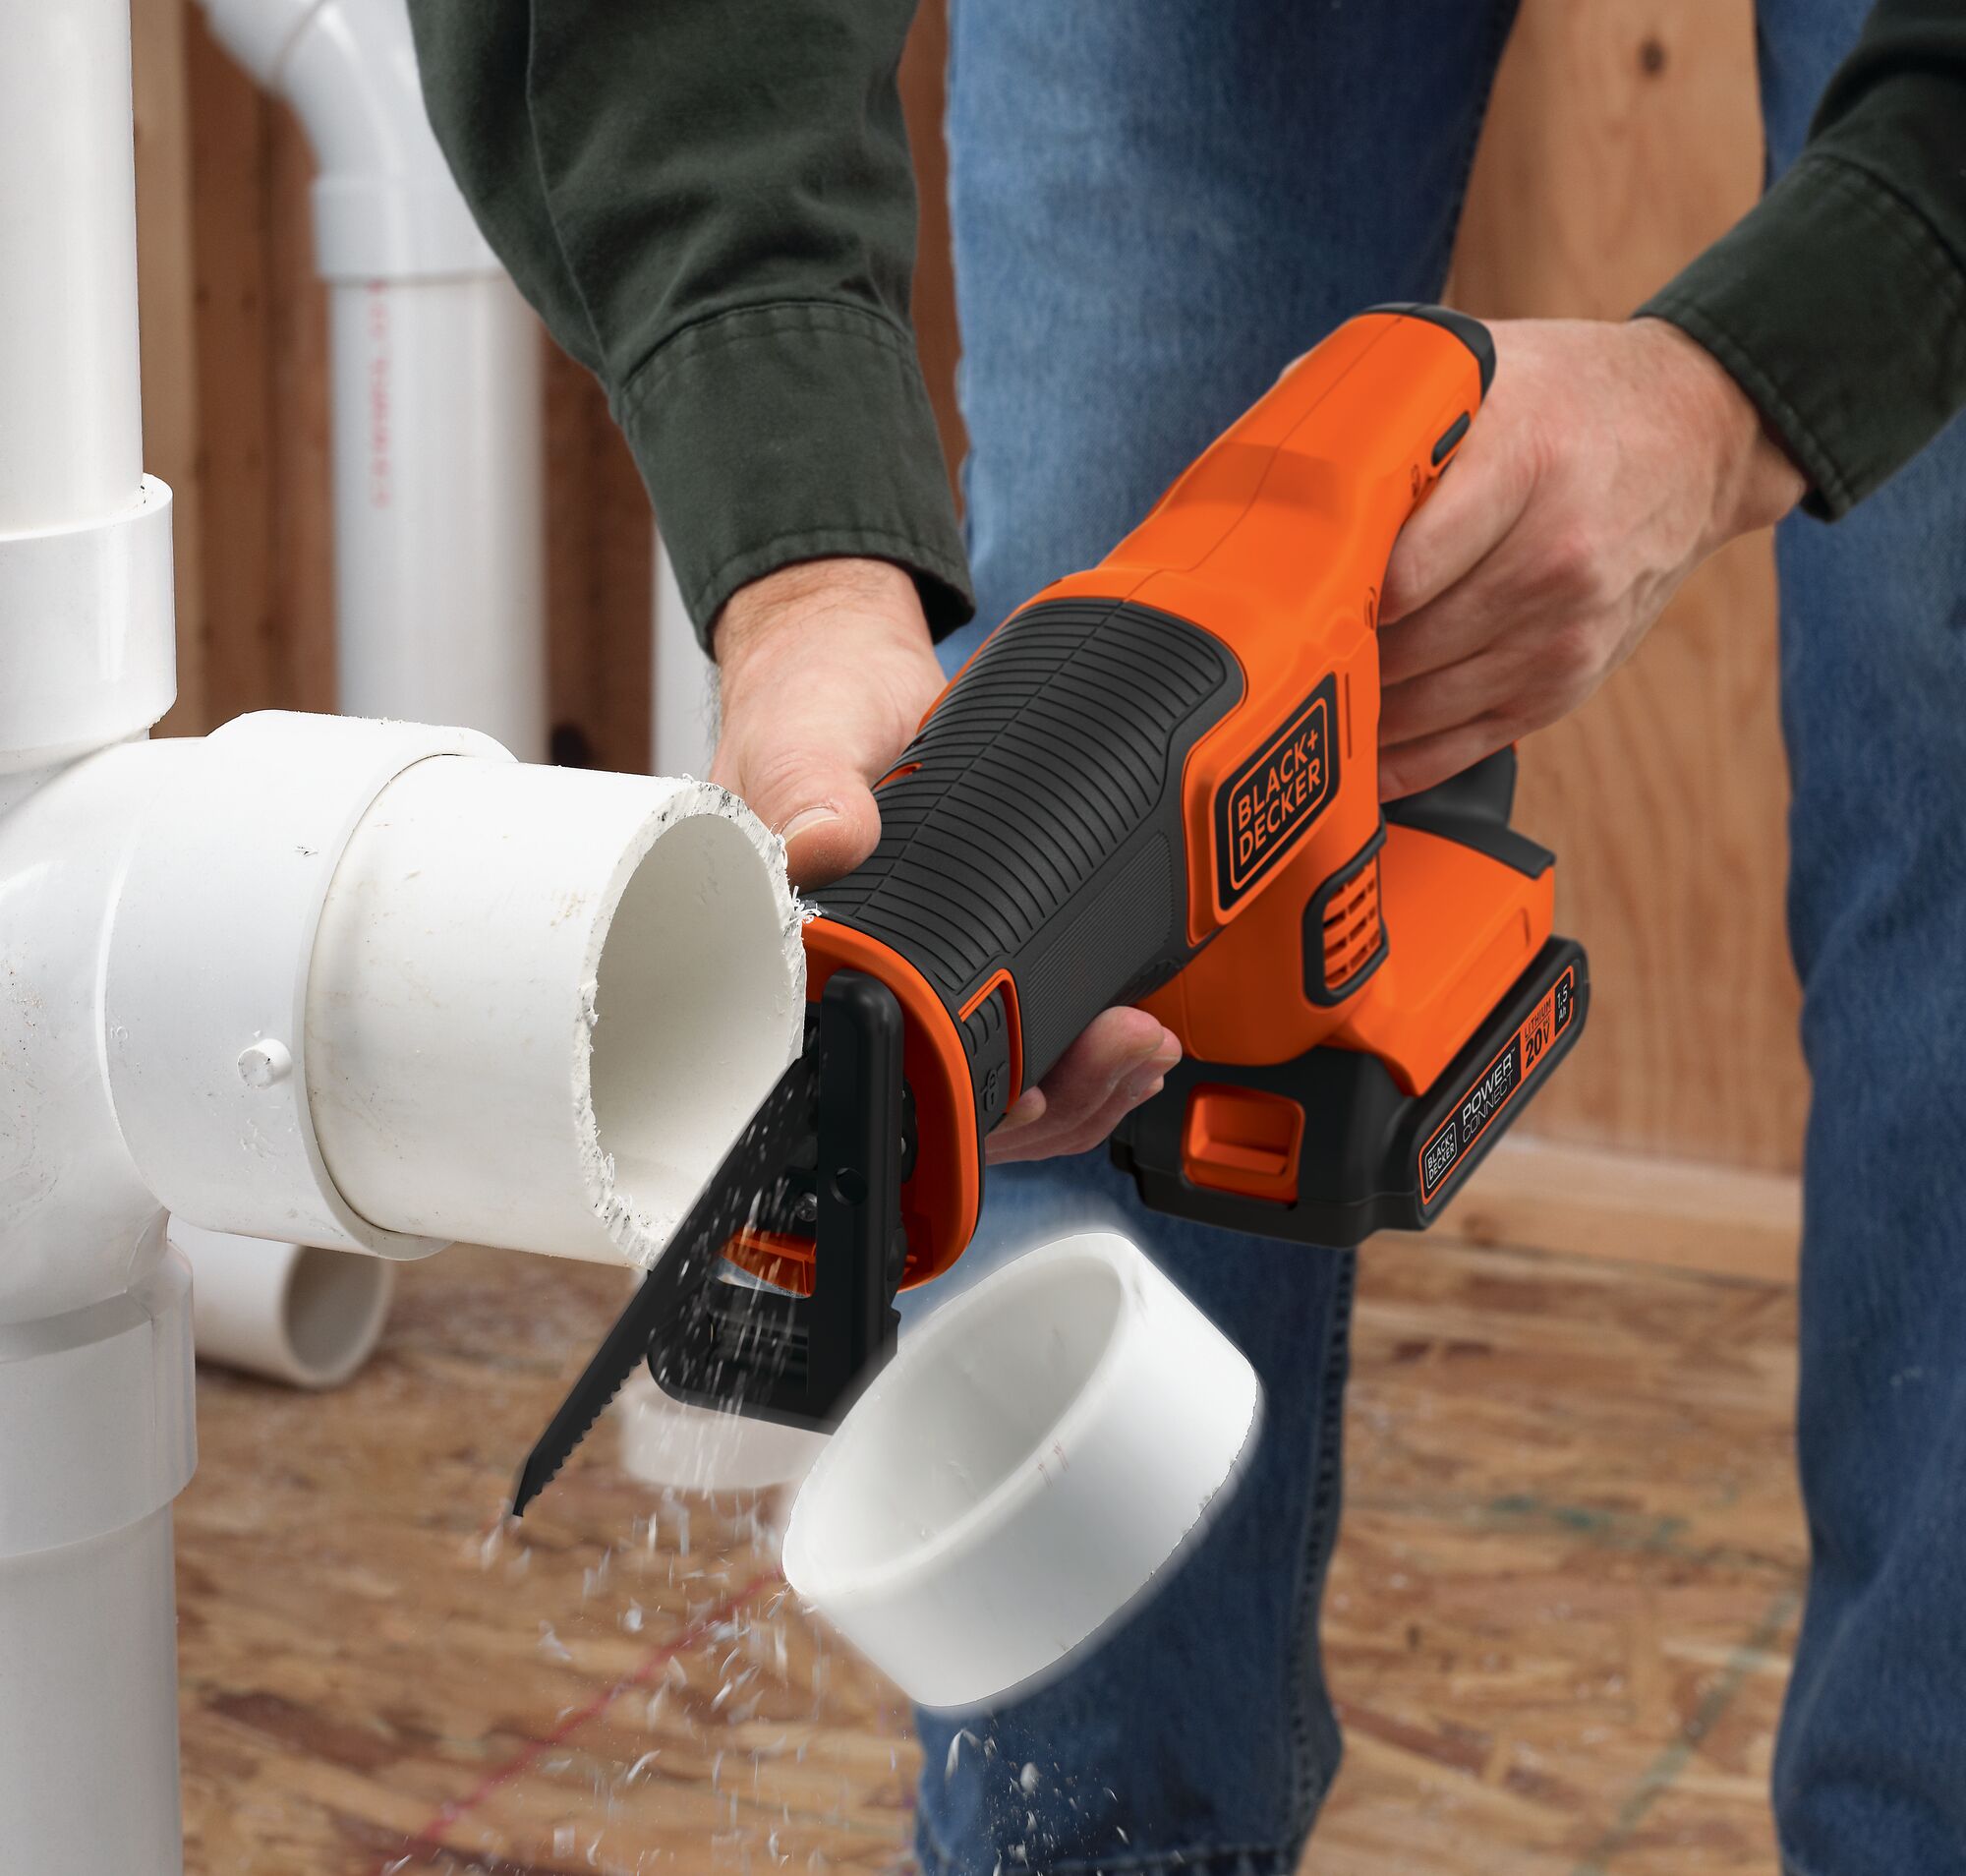 black and decker 20 volt cordless reciprocating saw kit being used.